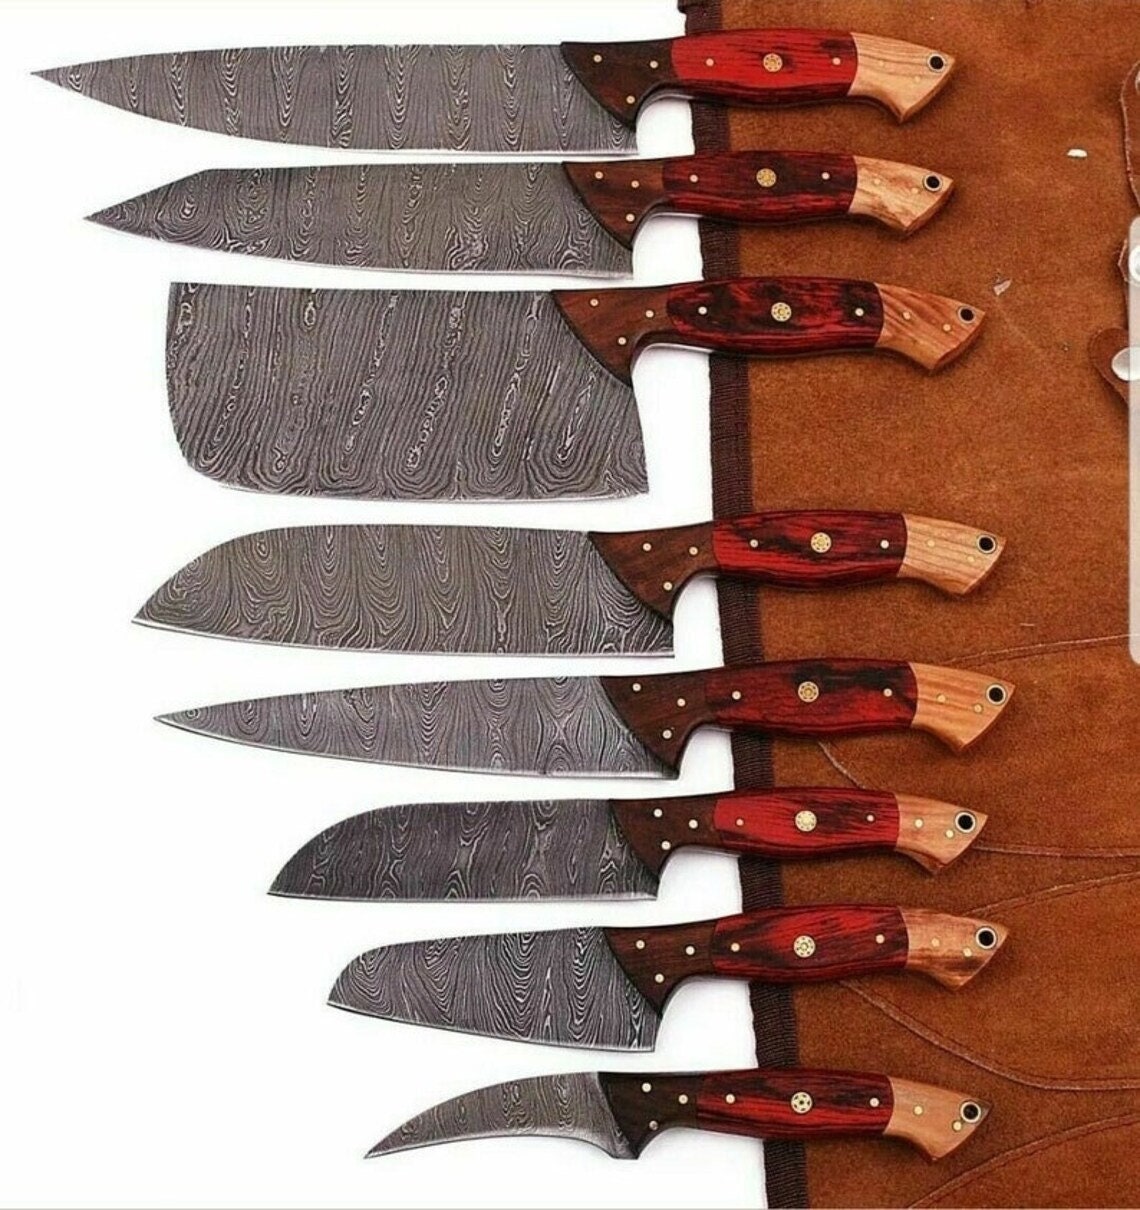 prime damascus Chef Knife, Sharp kitchen knives, Professional meat Cutting  knife for Chefs, Best Handmade Gift (Rose Wood with Spacer) (Rose Wood)